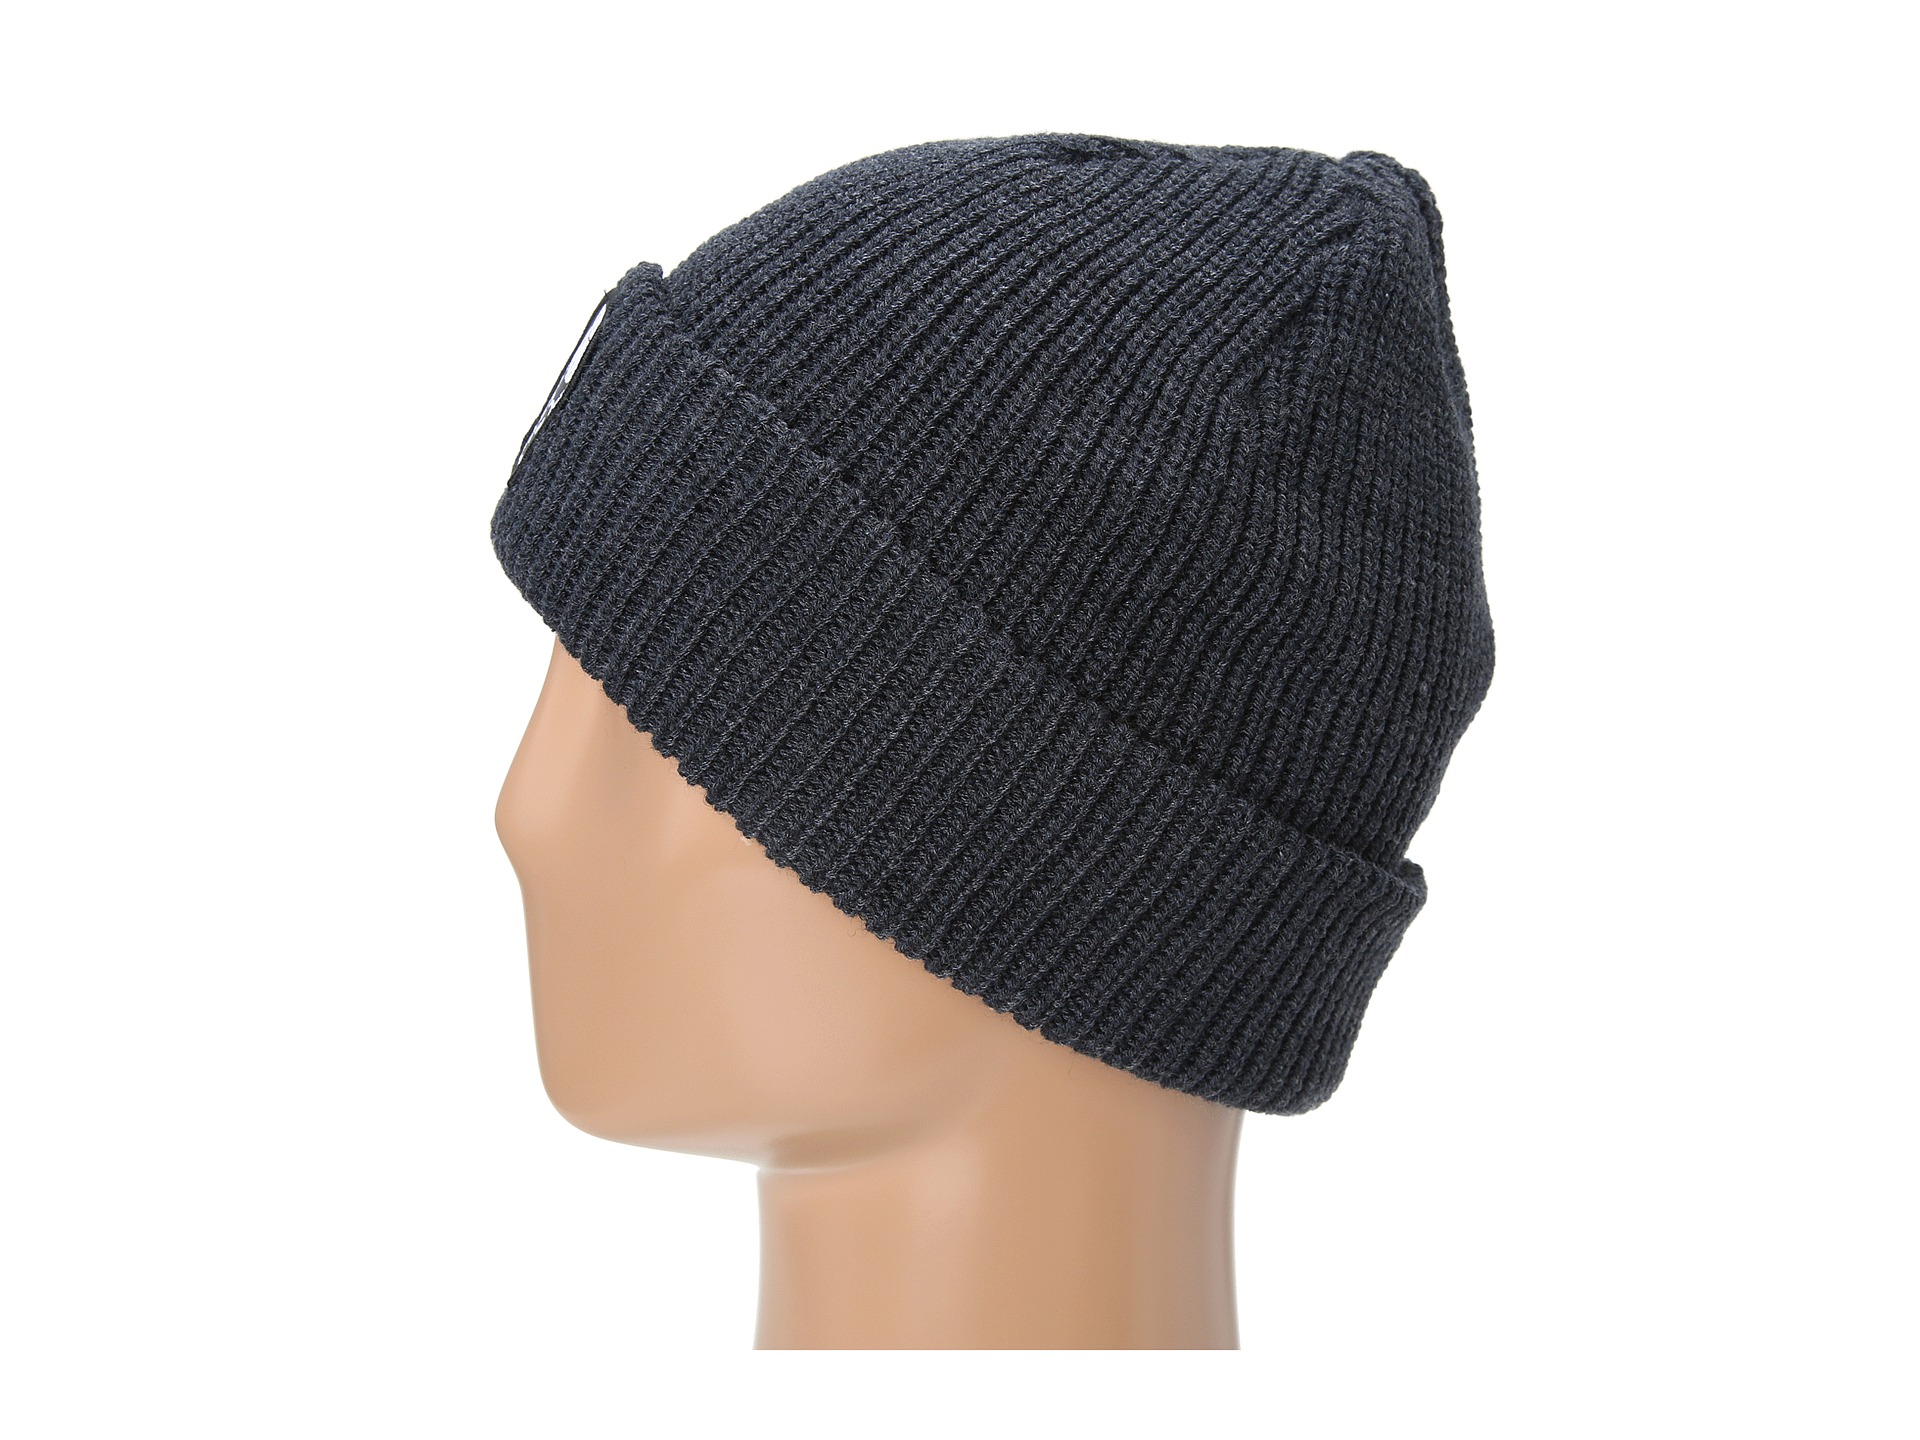 No results for thirtytwo crab head beanie - Search Zappos.com